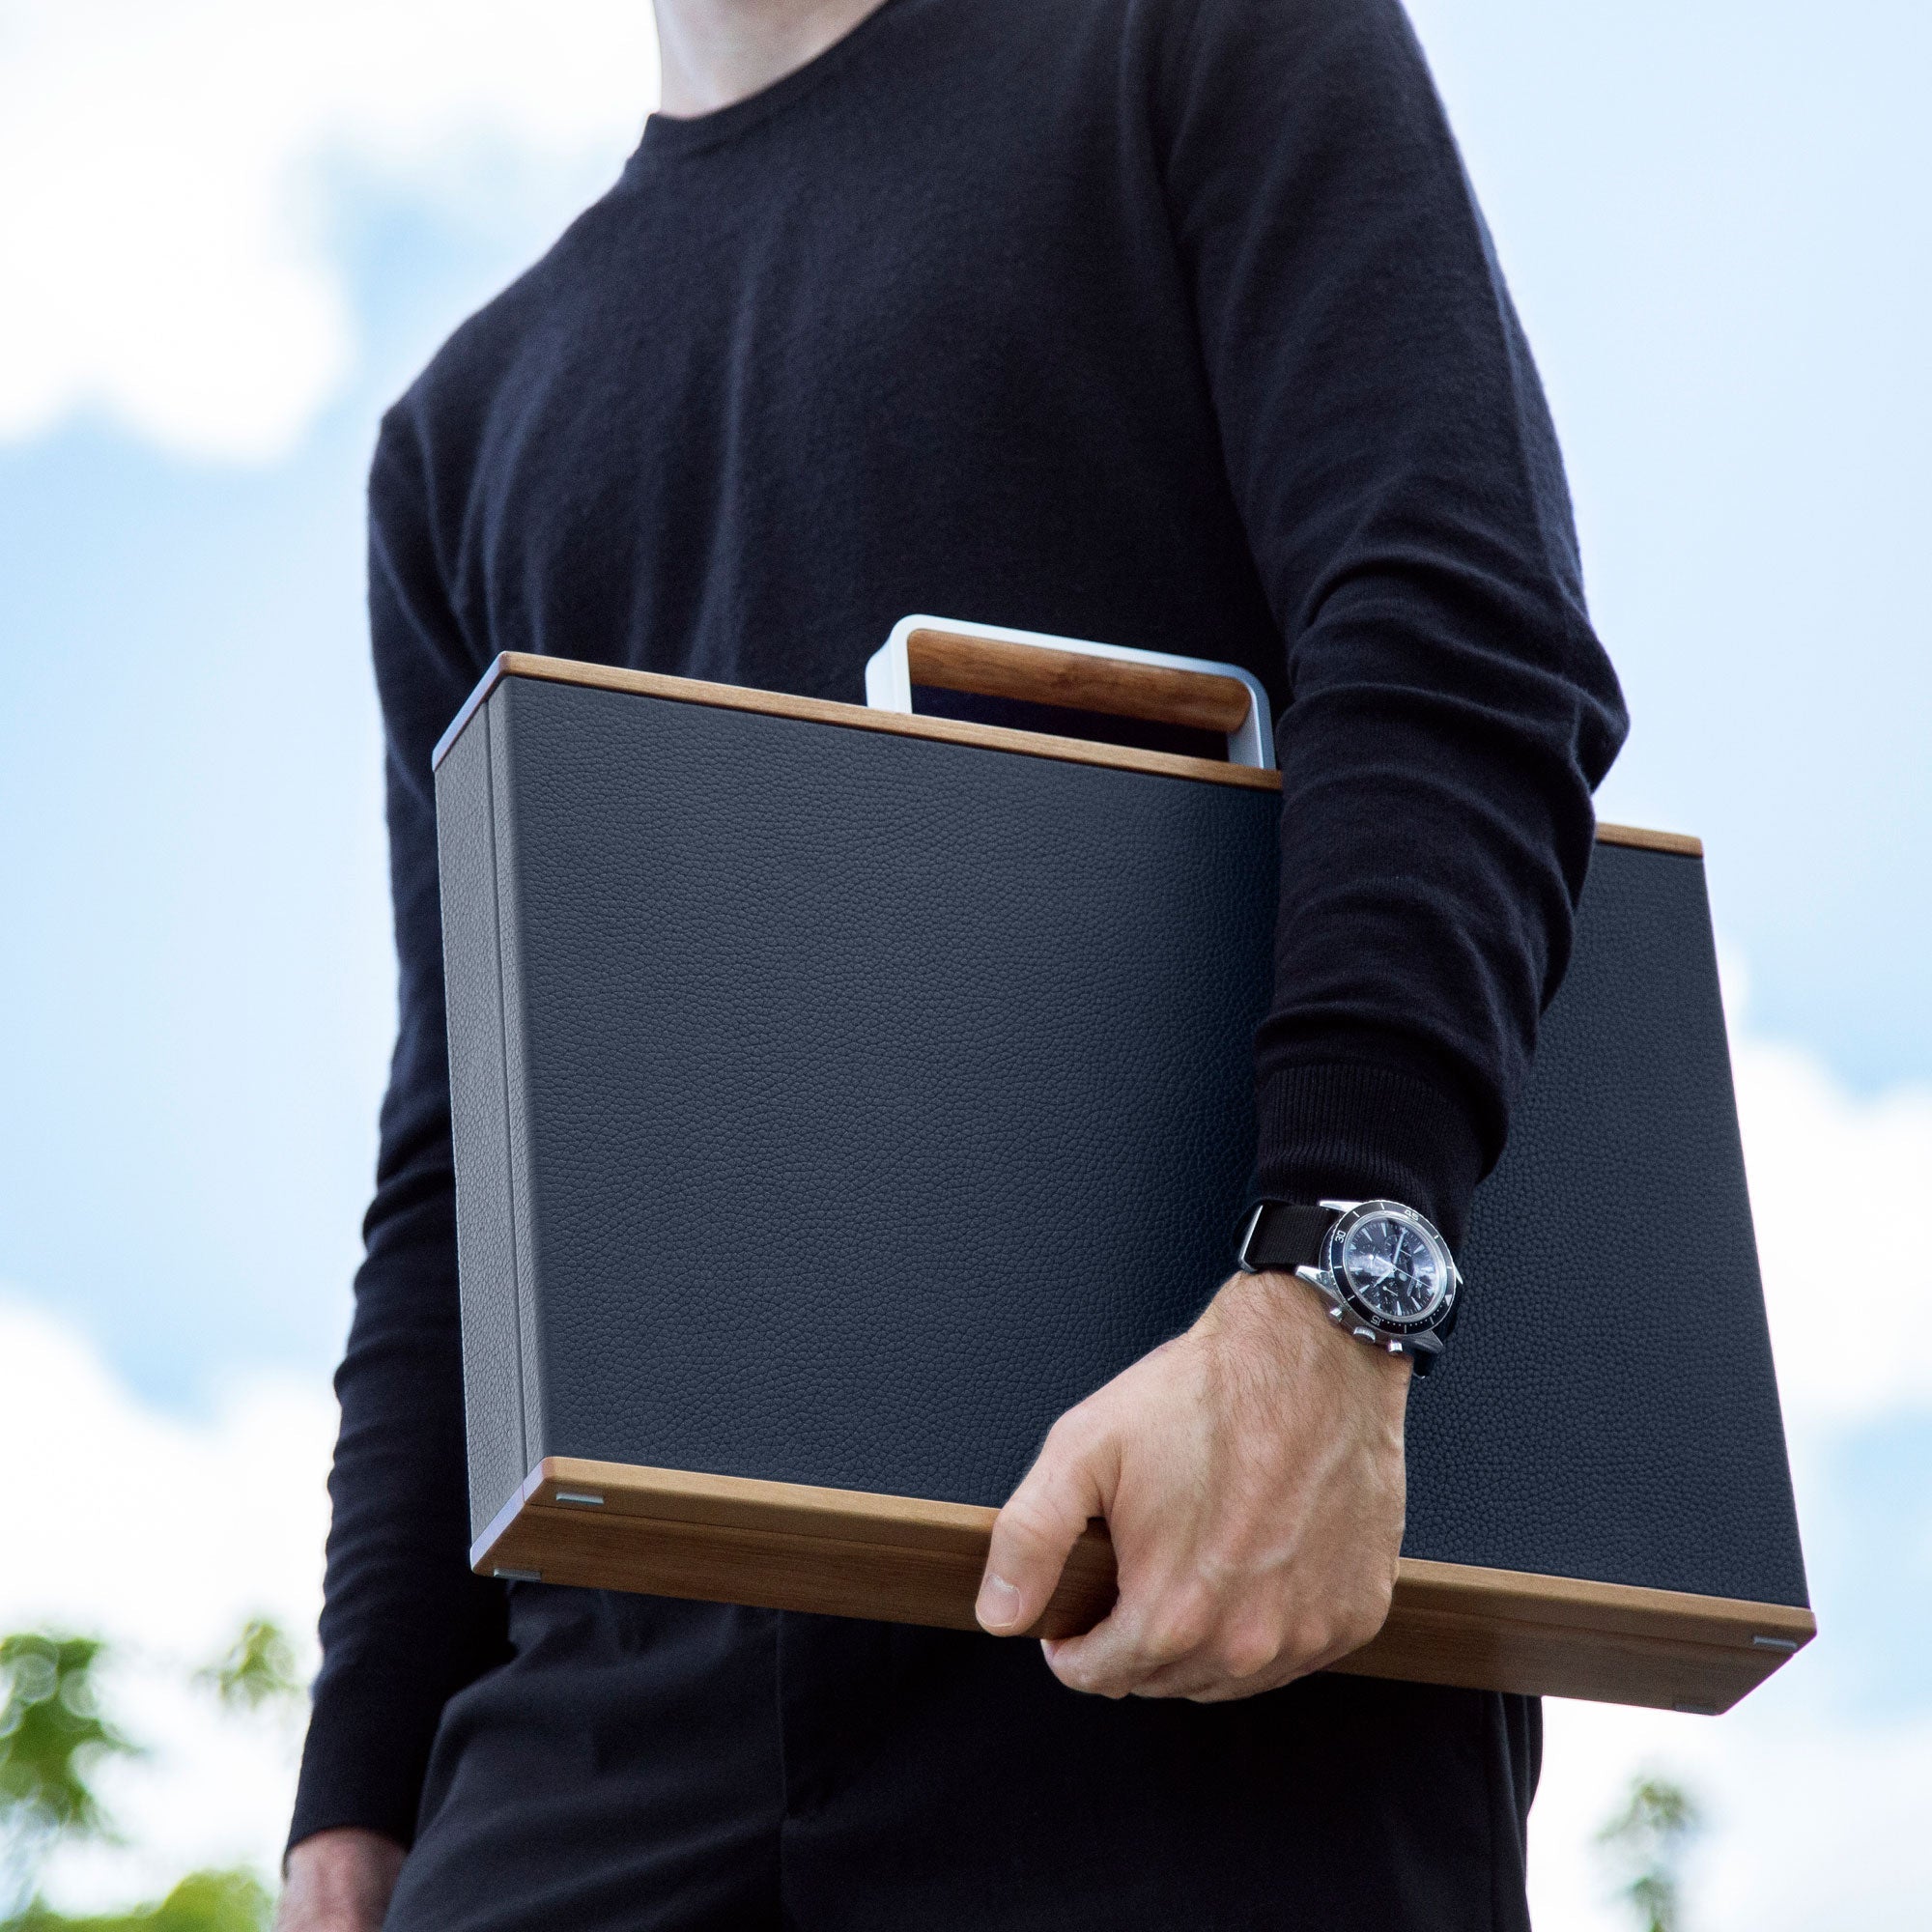 Lifestyle shot of sustainable watch briefcase made from recycled wood, fine French leather and carbon fiber and anodized aluminum casing being held by man wearing luxury watch